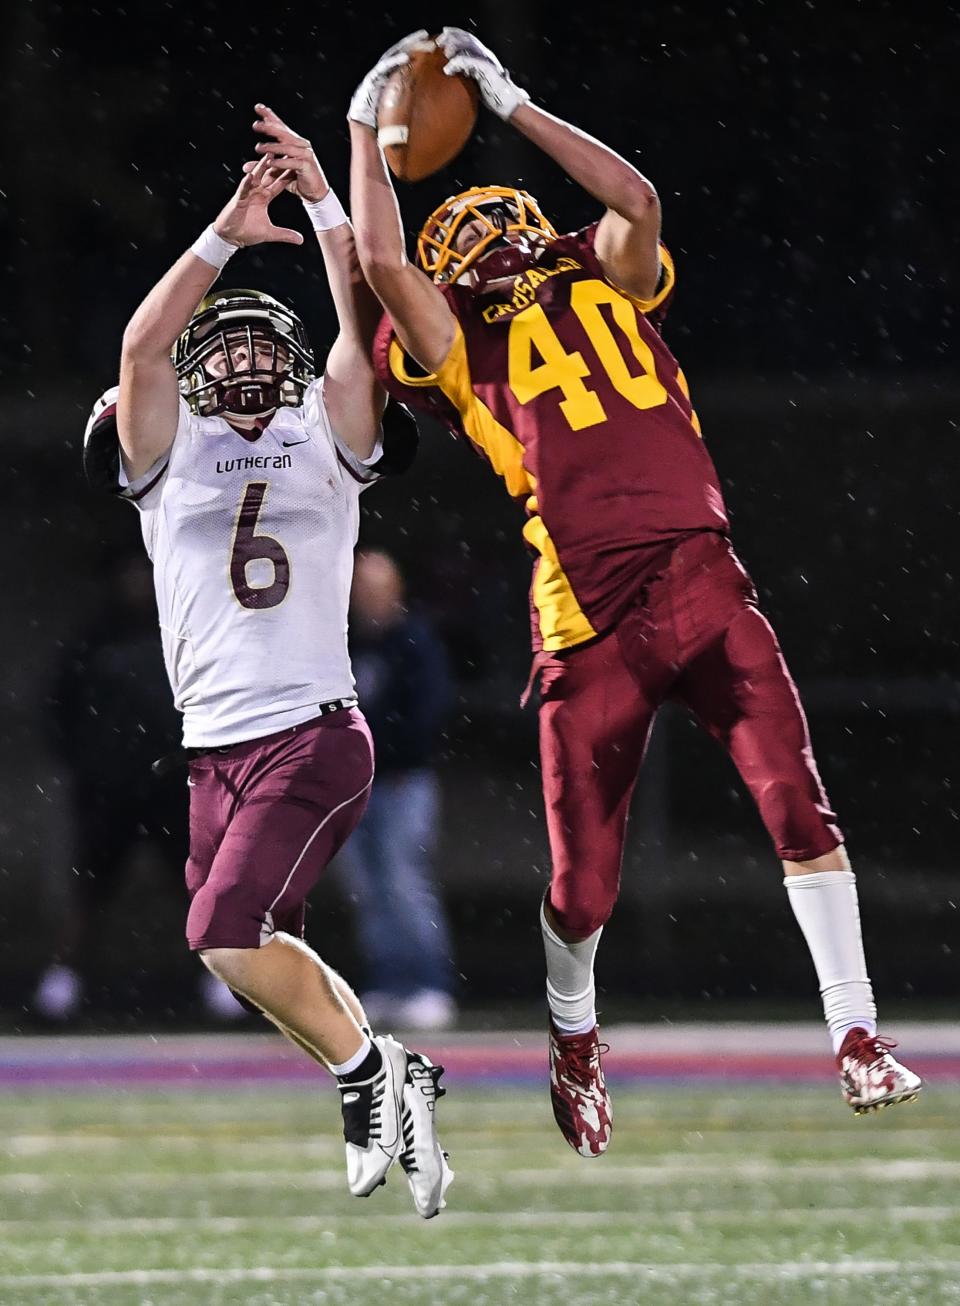 Scecina Memorial's Mason Beriault (40) catches a pass over Lutheran's Campbell Richardson (6) during the second half of the game on Friday, September 23, 2022, hosted at Roncalli High School Indianapolis. Lutheran defeated the Scecina Memorial 28-19.